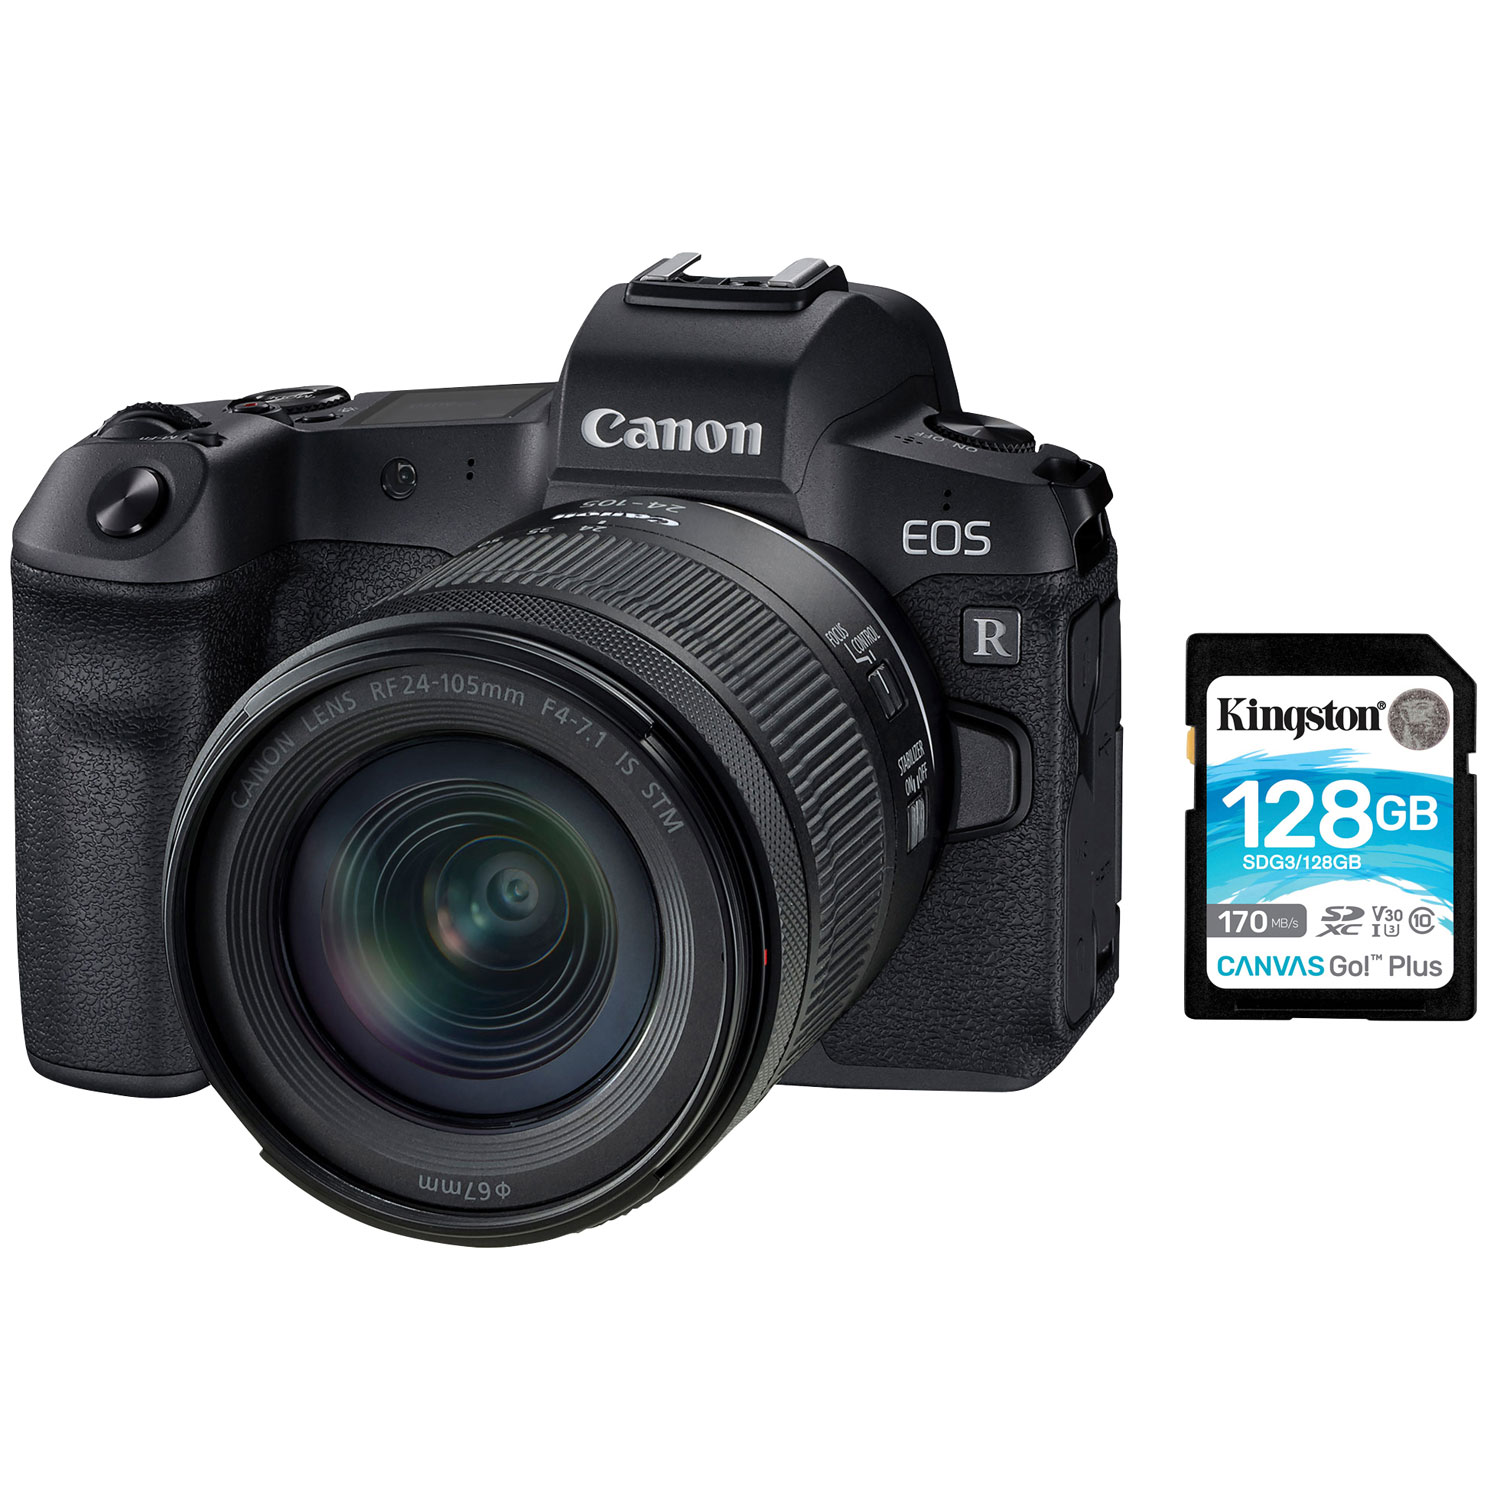 Canon EOS R Full-Frame Mirrorless Camera with 24-105mm IS STM Lens Kit & 128GB Memory Card